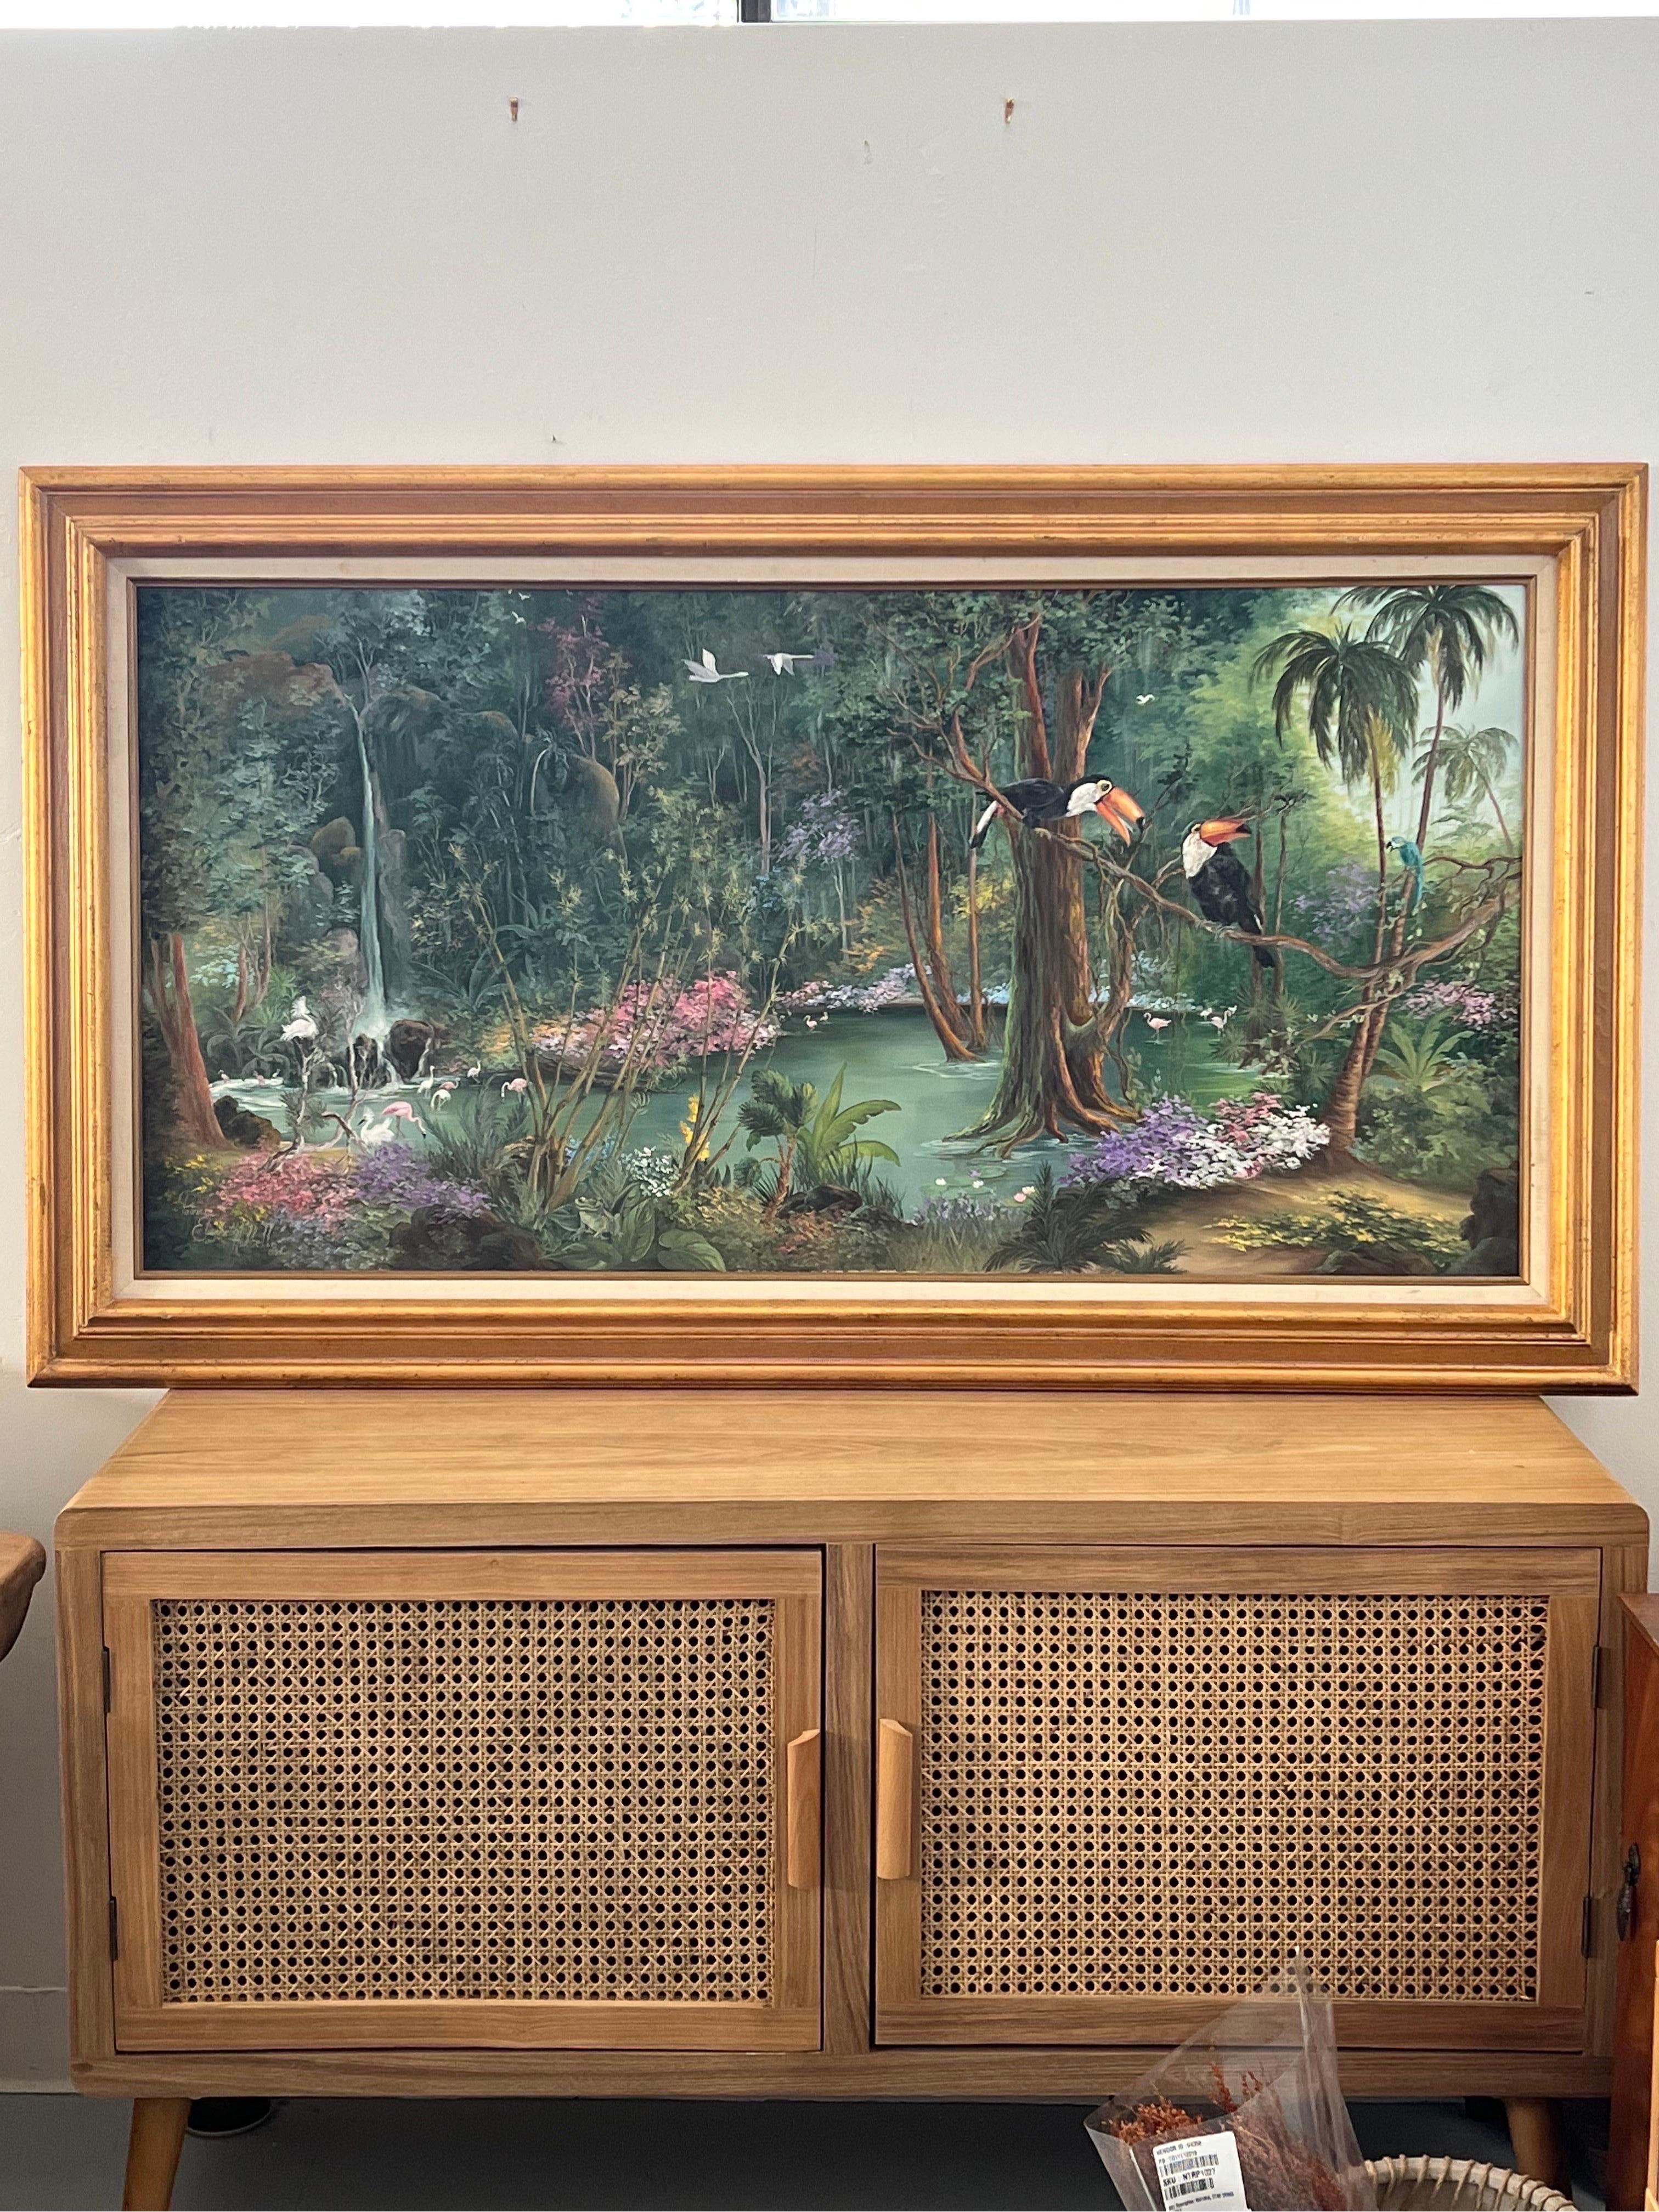 Patricia and Elizabeth Hubbell were a Mother and Daughter Team of Professional Traditional-Style Artists that had a Vintage Mid Century Modern Room Divider Book Shelf Fold Out Bar Top Career Spanning More Than 60 Years in California. Their Painting